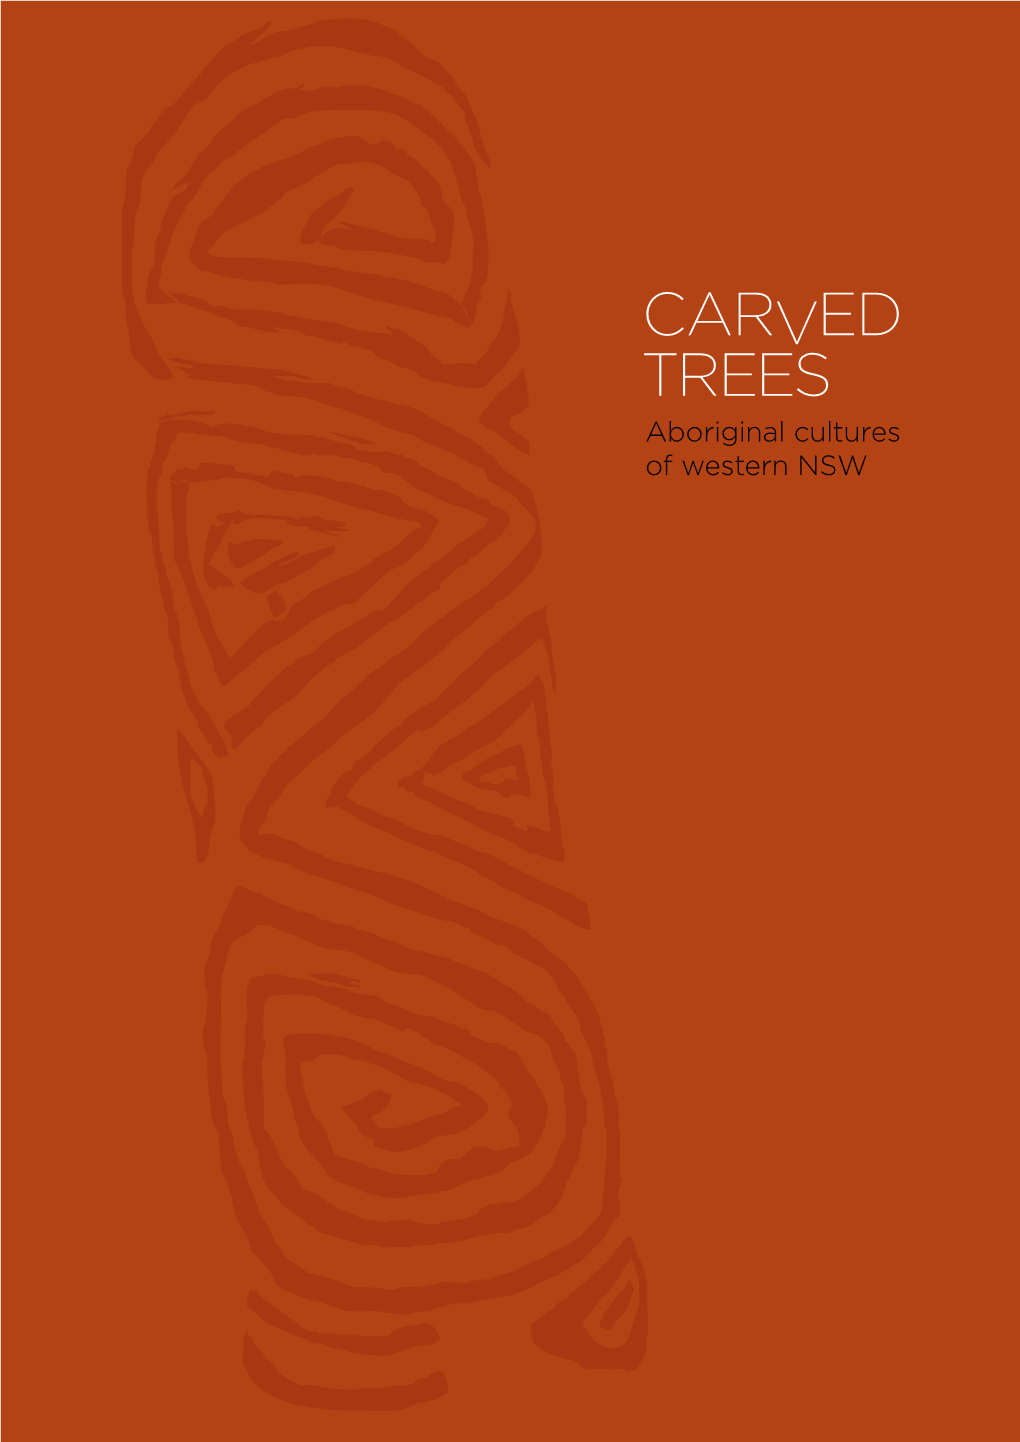 Carved Trees: Aboriginal Cultures of Western NSW